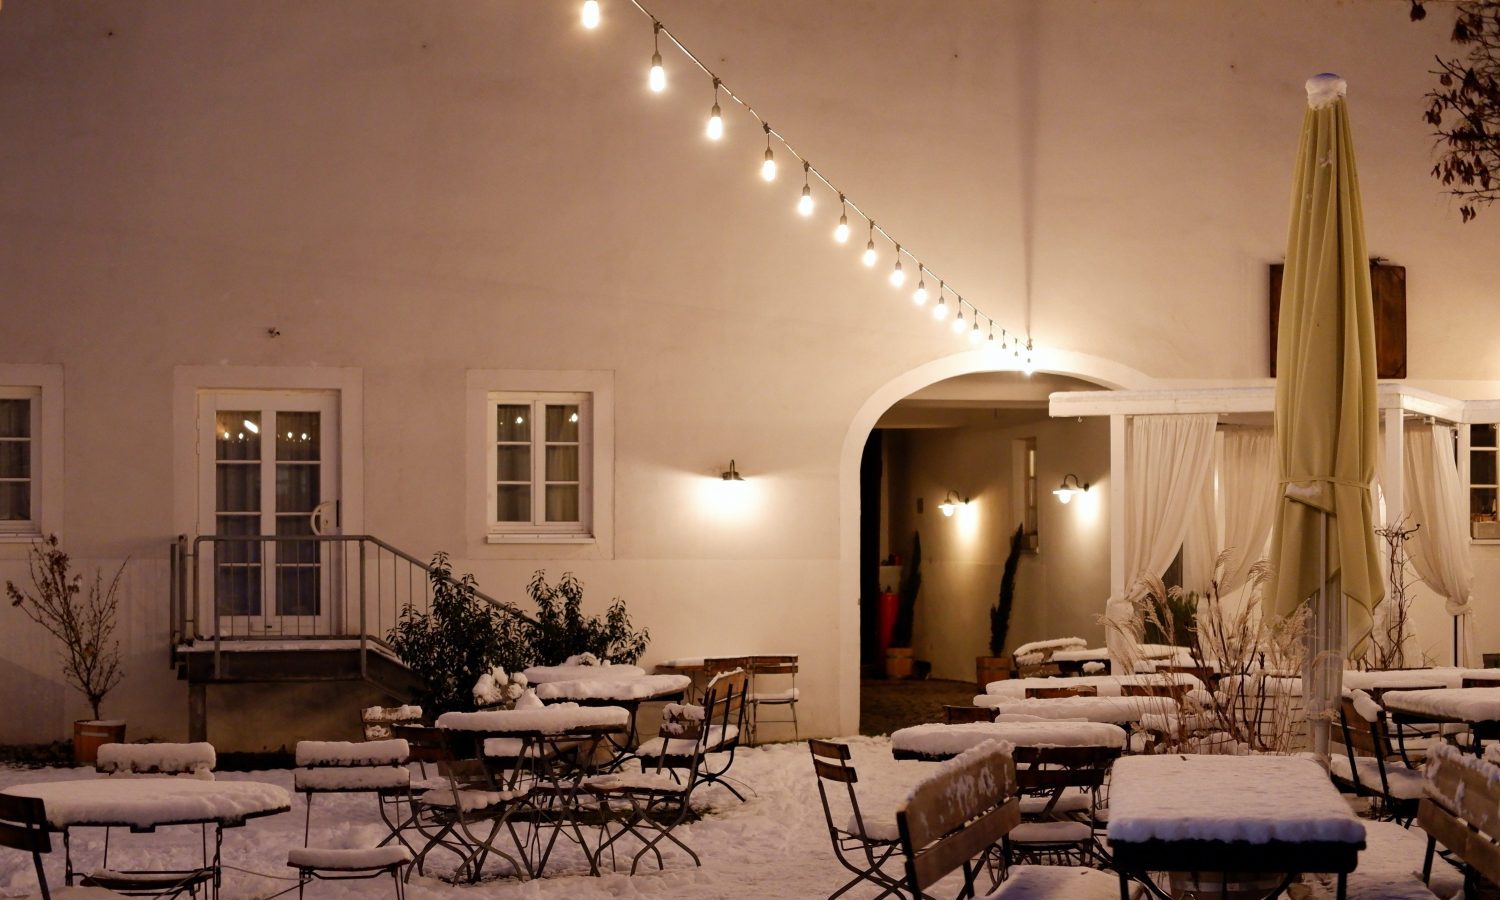 Outdoor Dining In The Winter Is Complicated — Here's What You Should Account For